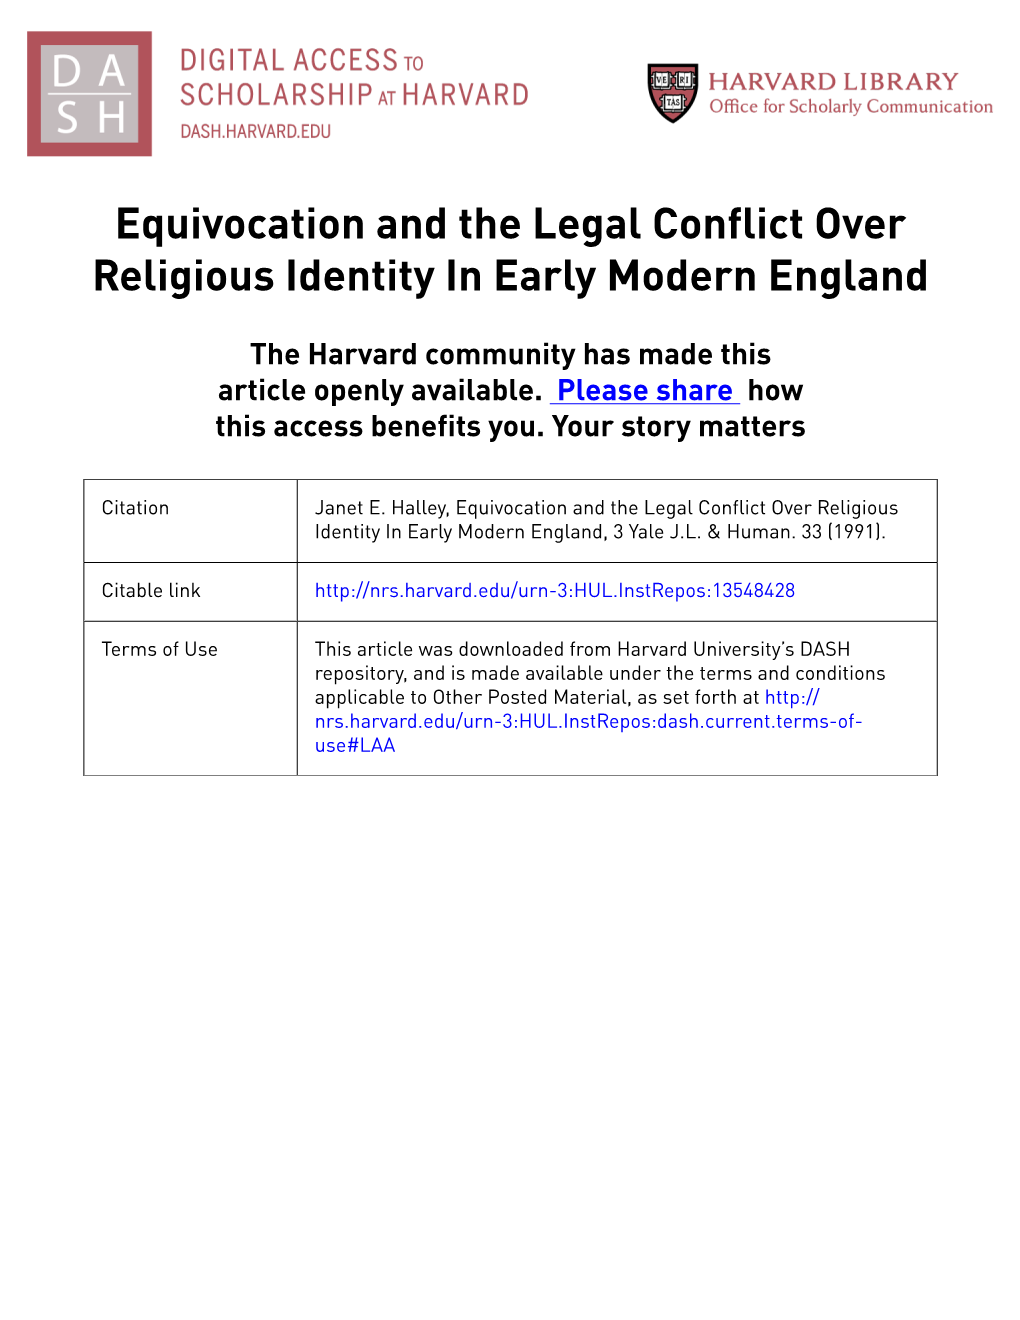 Equivocation and the Legal Conflict Over Religious Identity in Early Modern England